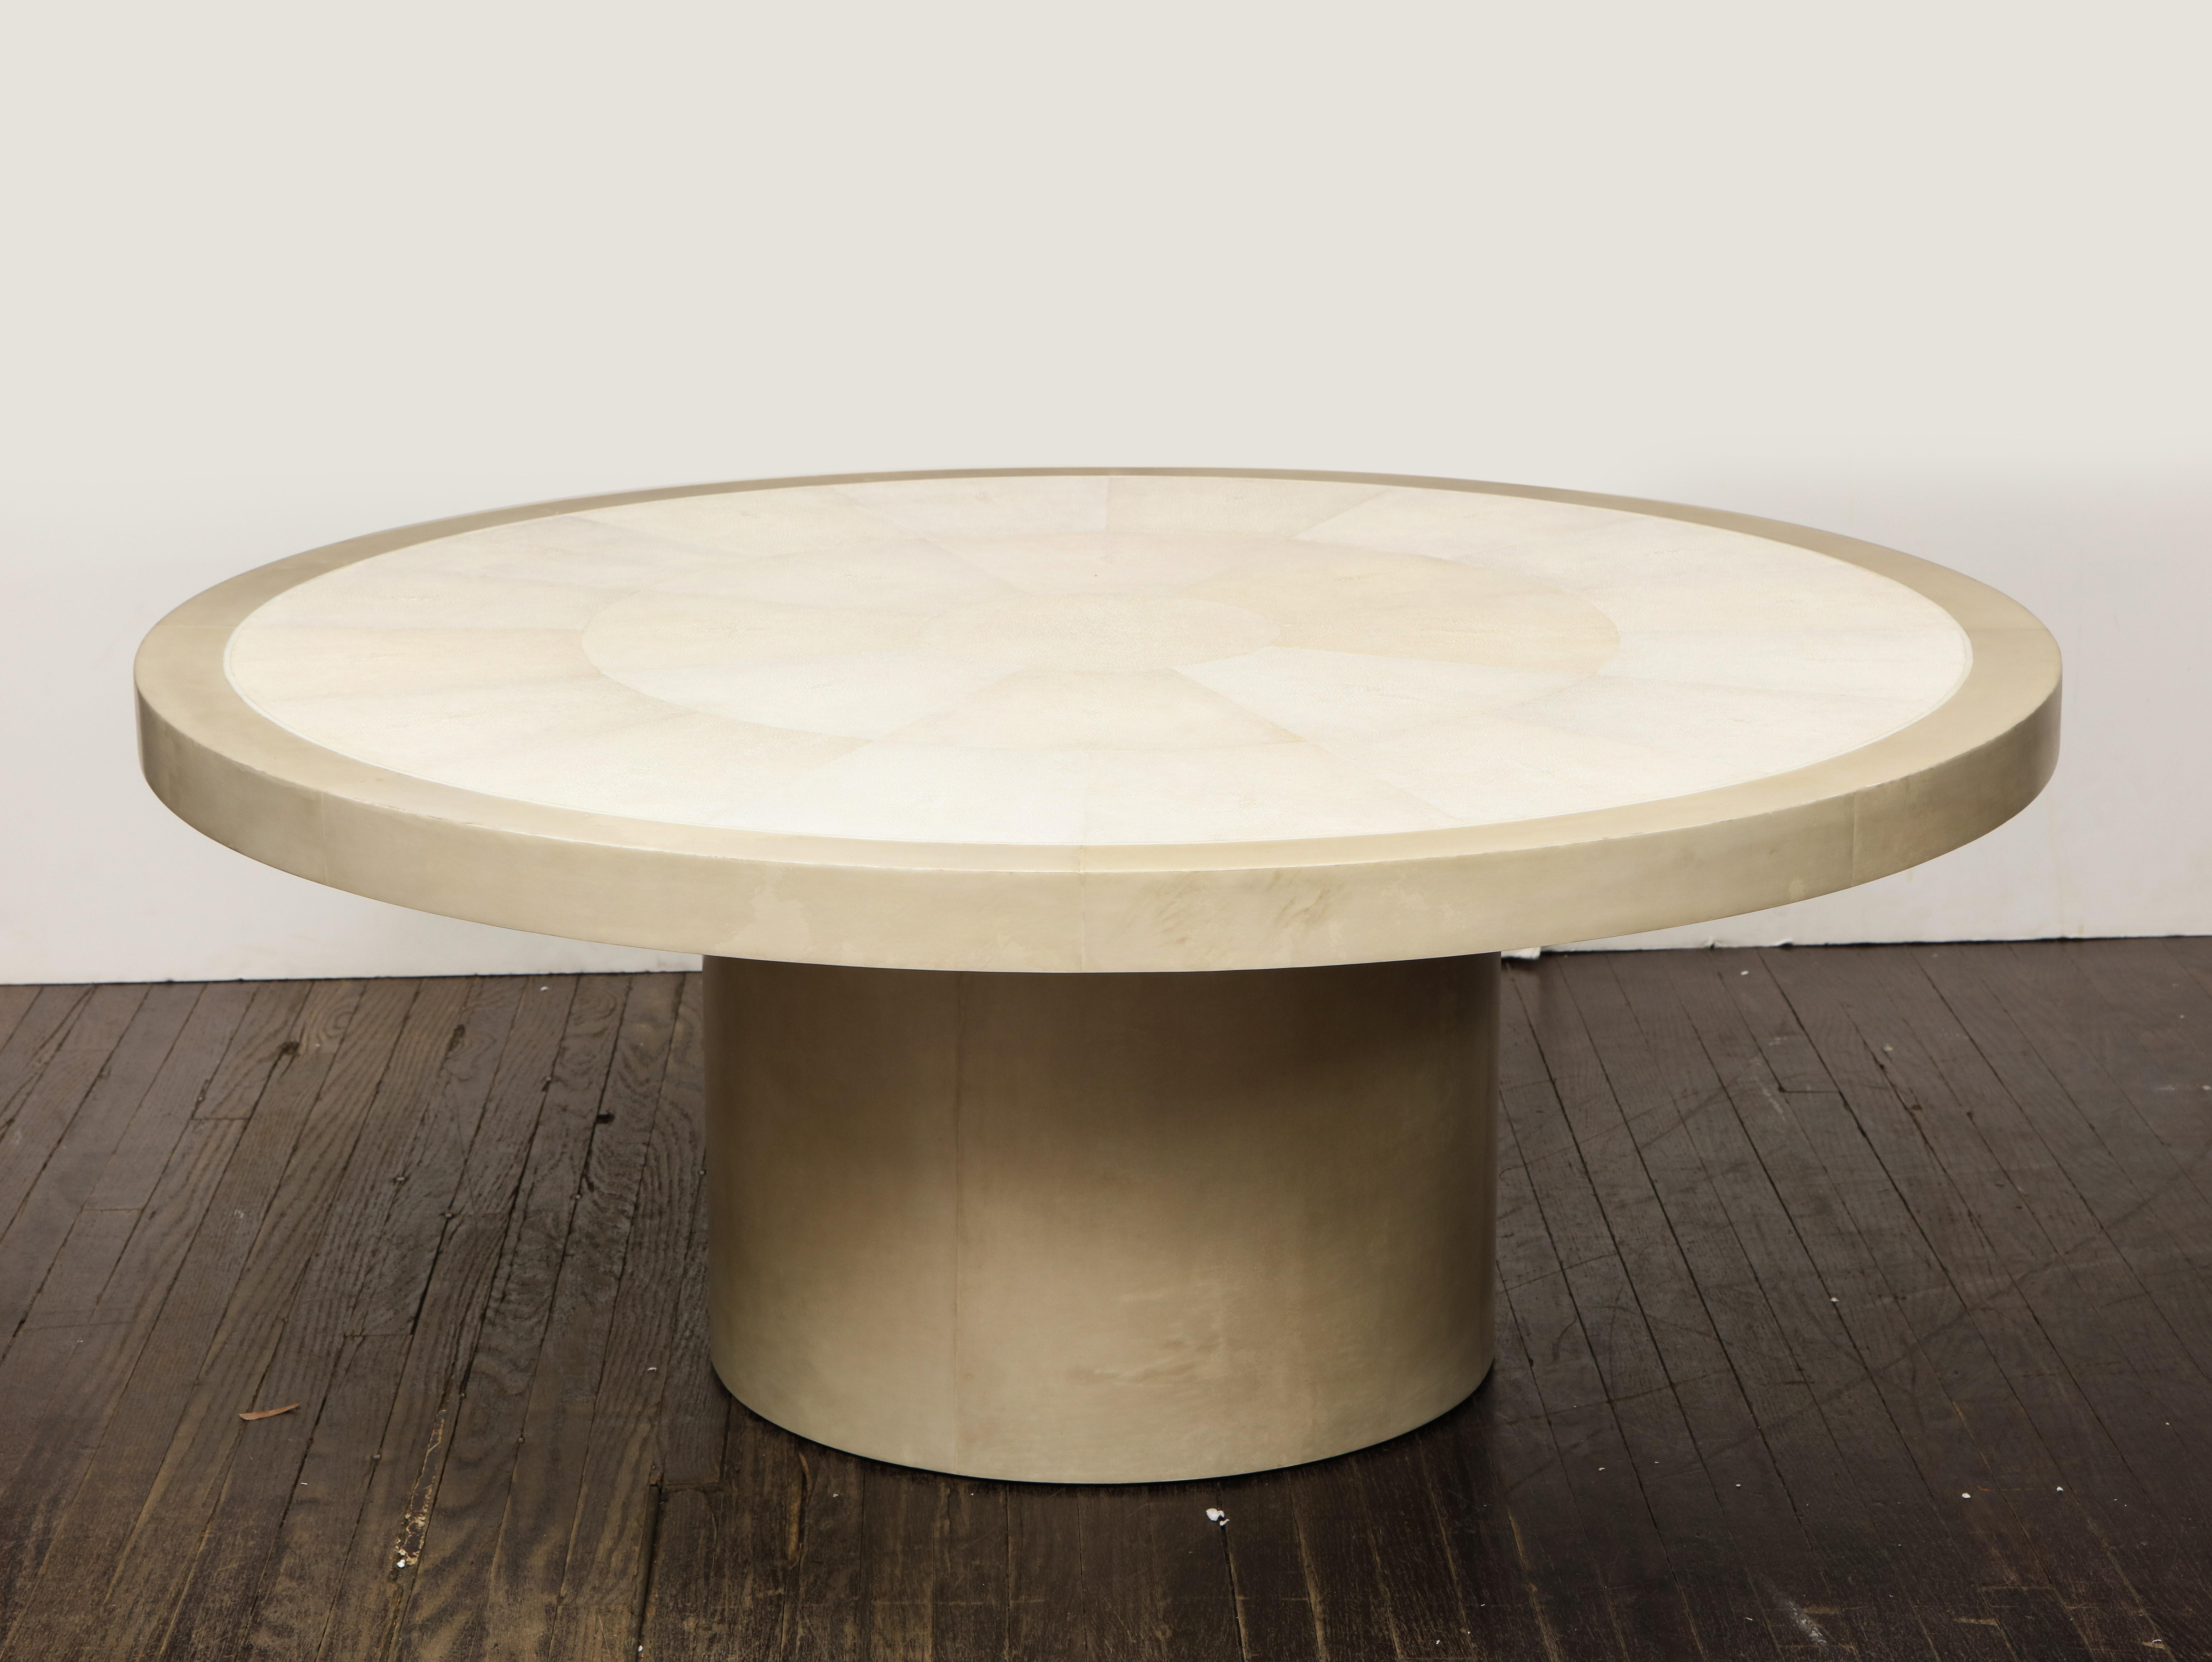 Custom round genuine shagreen table with bone trim and parchment base. Customization is available in different sizes and colors.